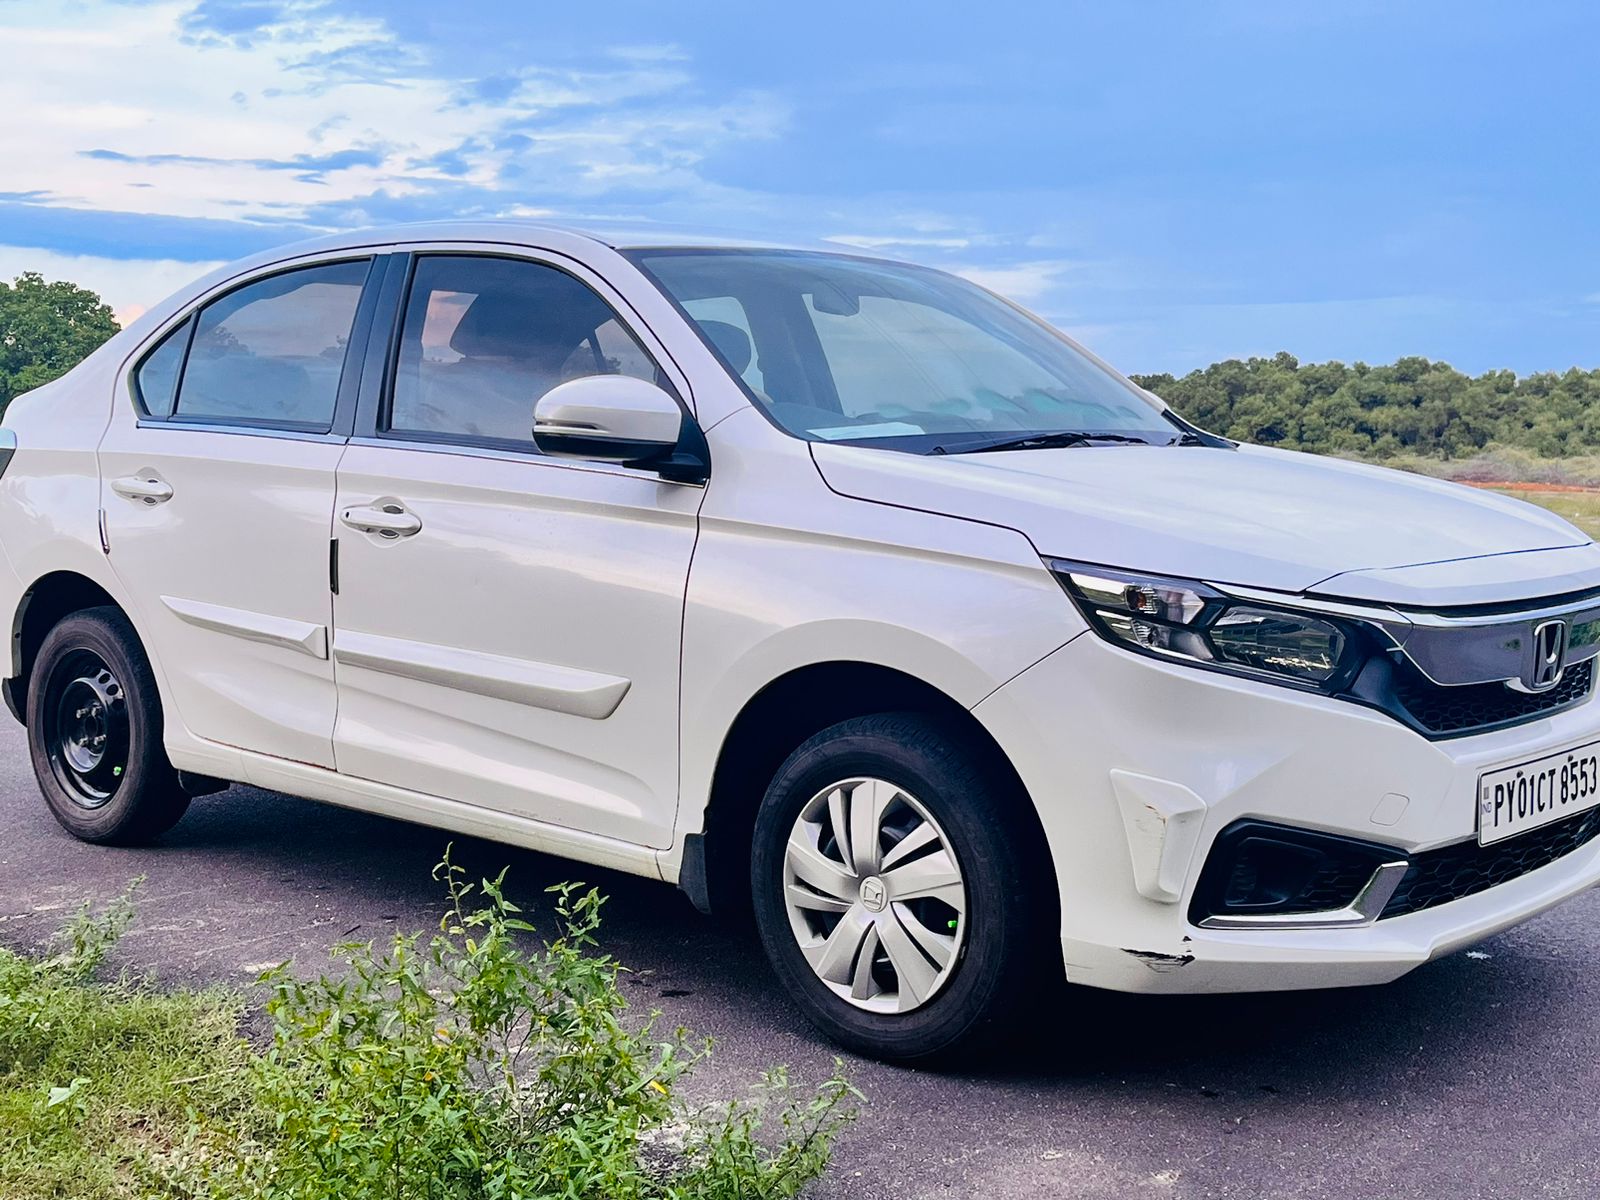 5145-for-sale-Honda-Amaze-Petrol-First-Owner-2018-PY-registered-rs-0